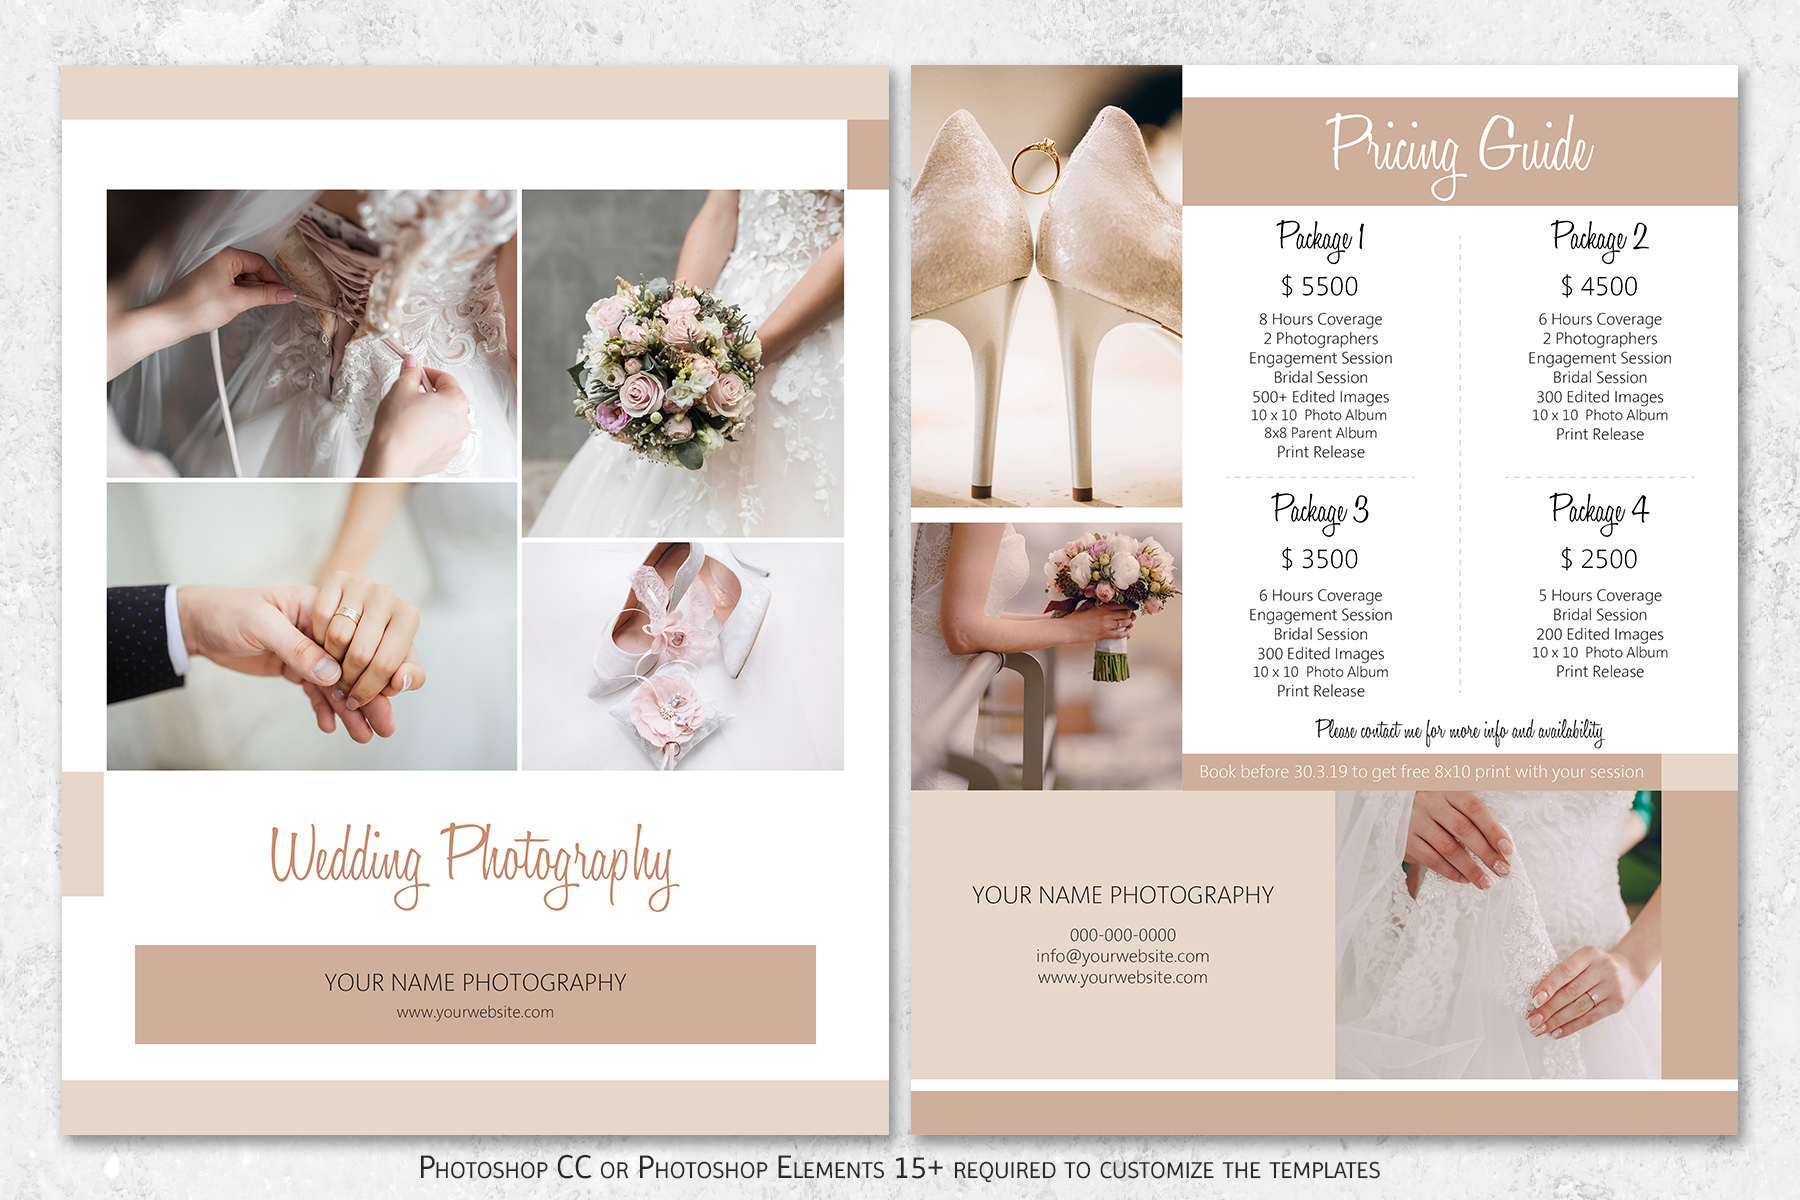 Wedding Photography Guide Template